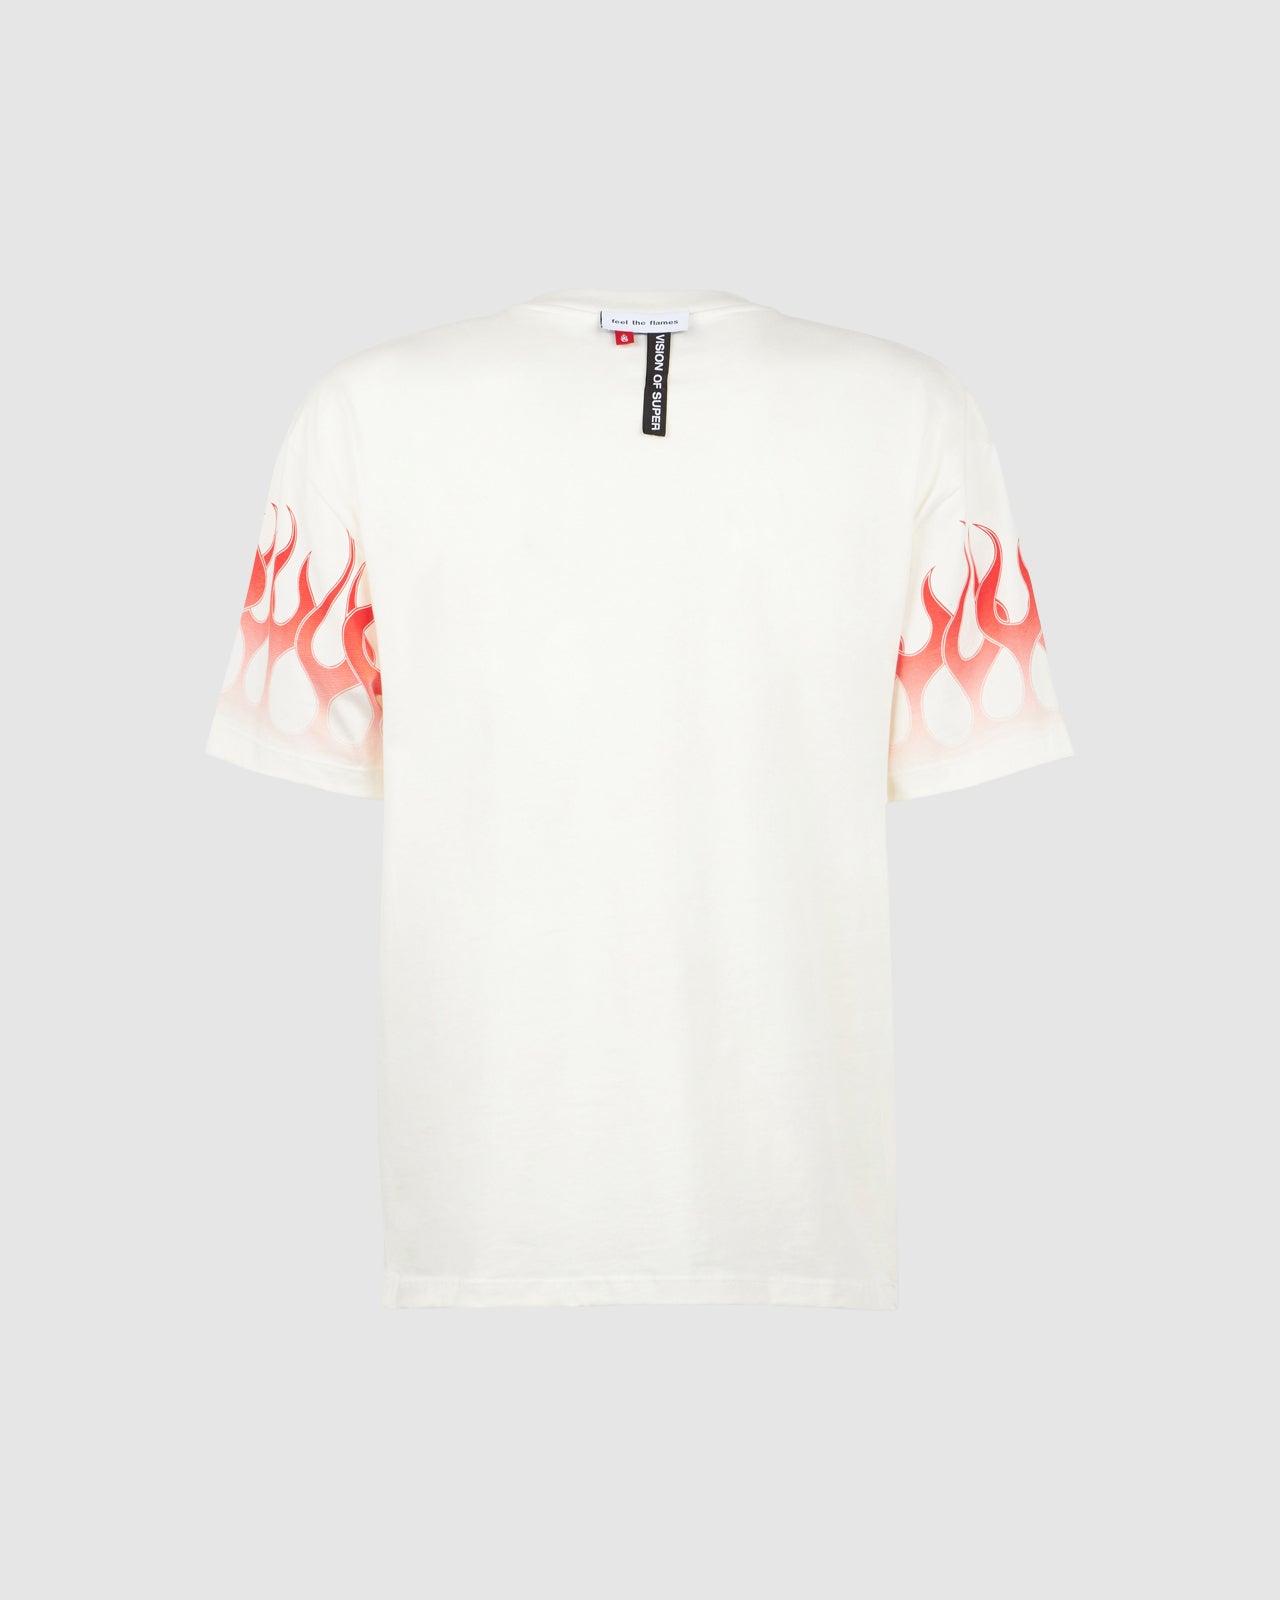 VISION OF SUPER WHITE TSHIRT WITH RED FLAMES